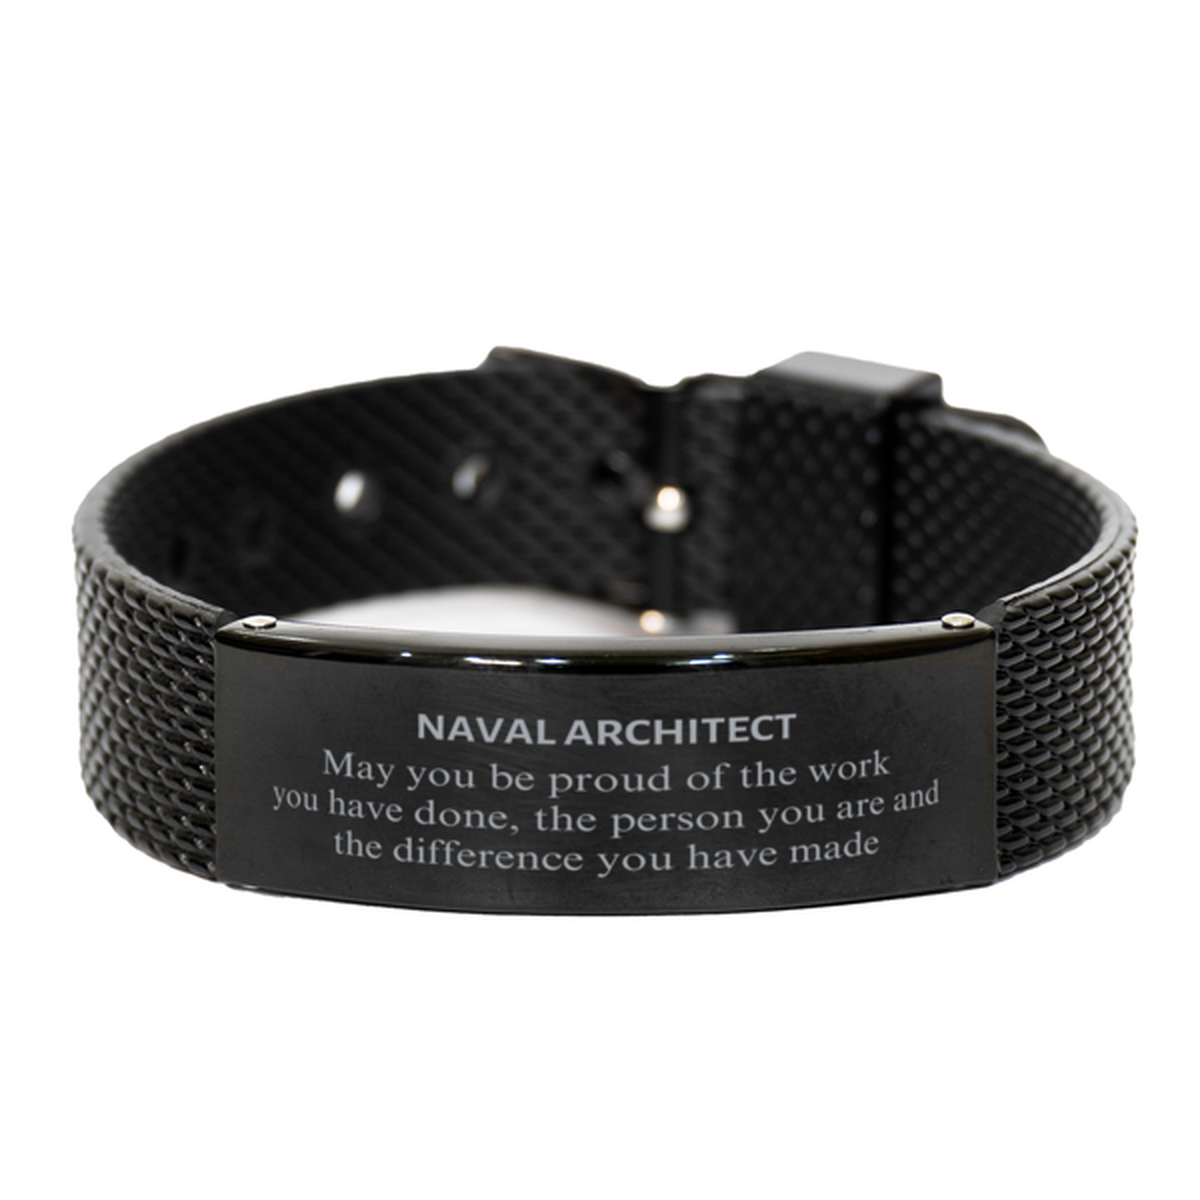 Naval Architect May you be proud of the work you have done, Retirement Naval Architect Black Shark Mesh Bracelet for Colleague Appreciation Gifts Amazing for Naval Architect